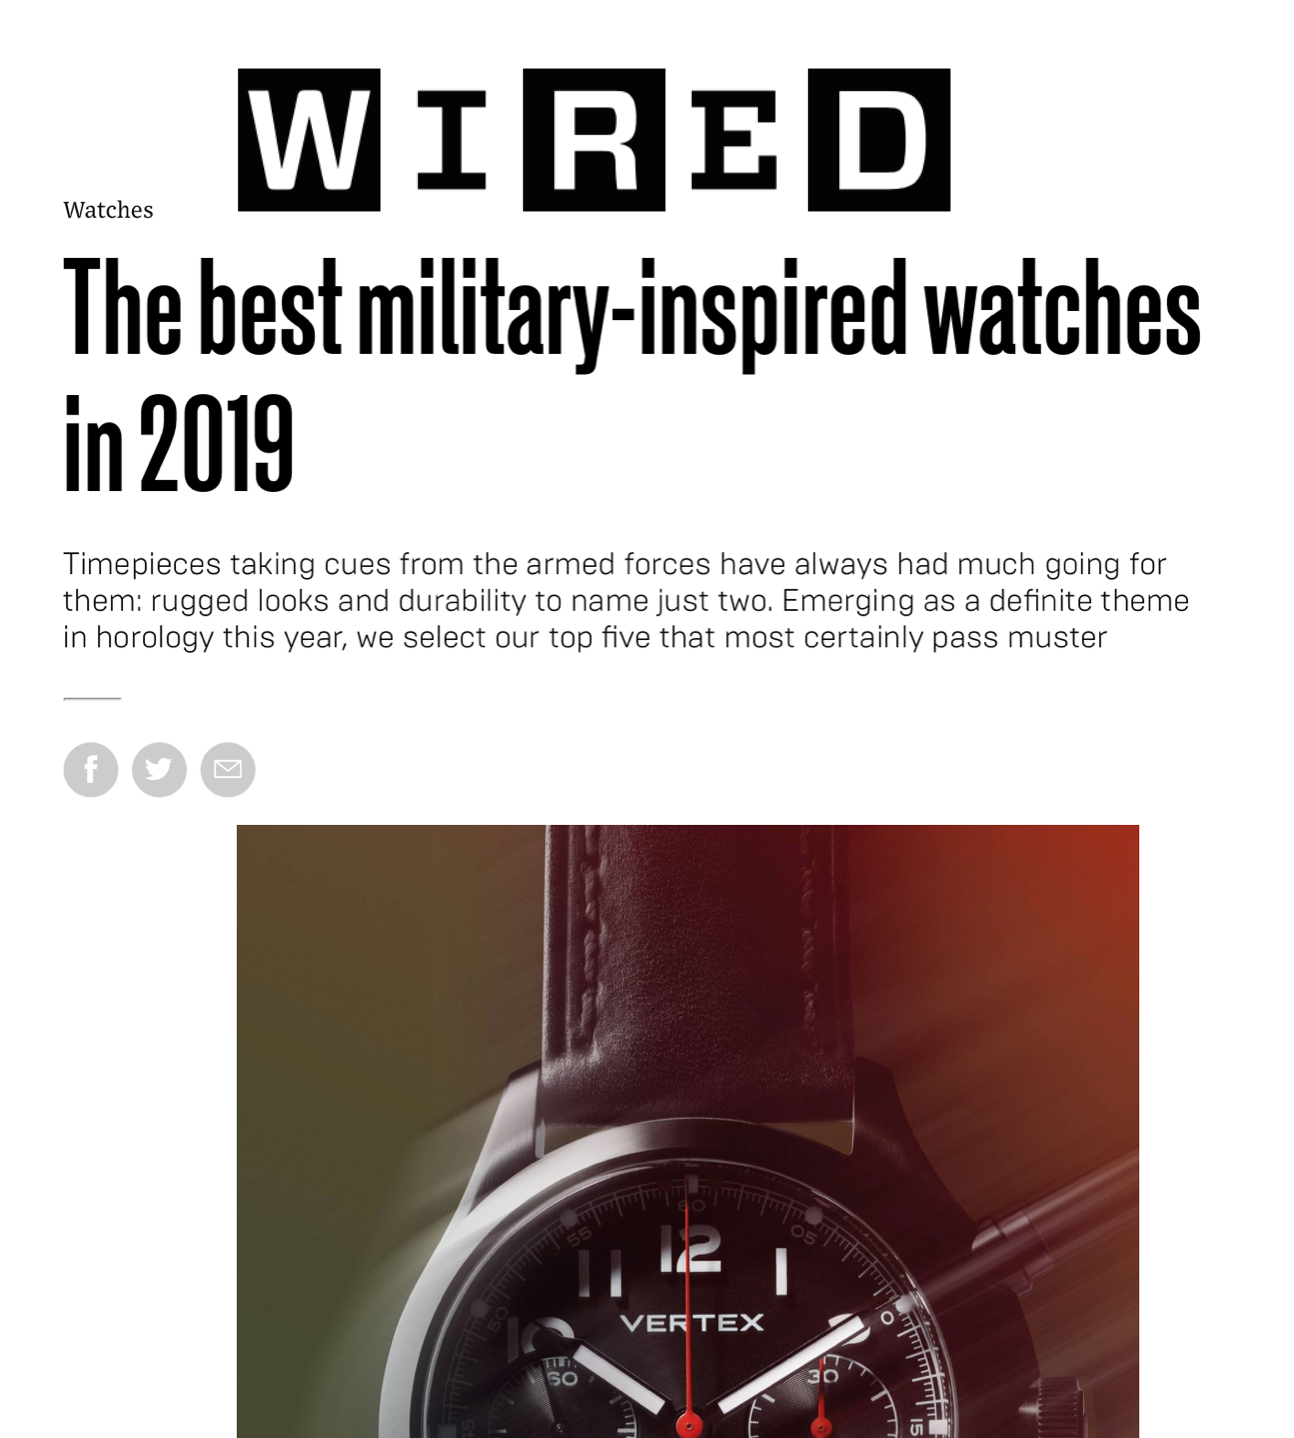 Wired - The best military-inspired watches in 2019